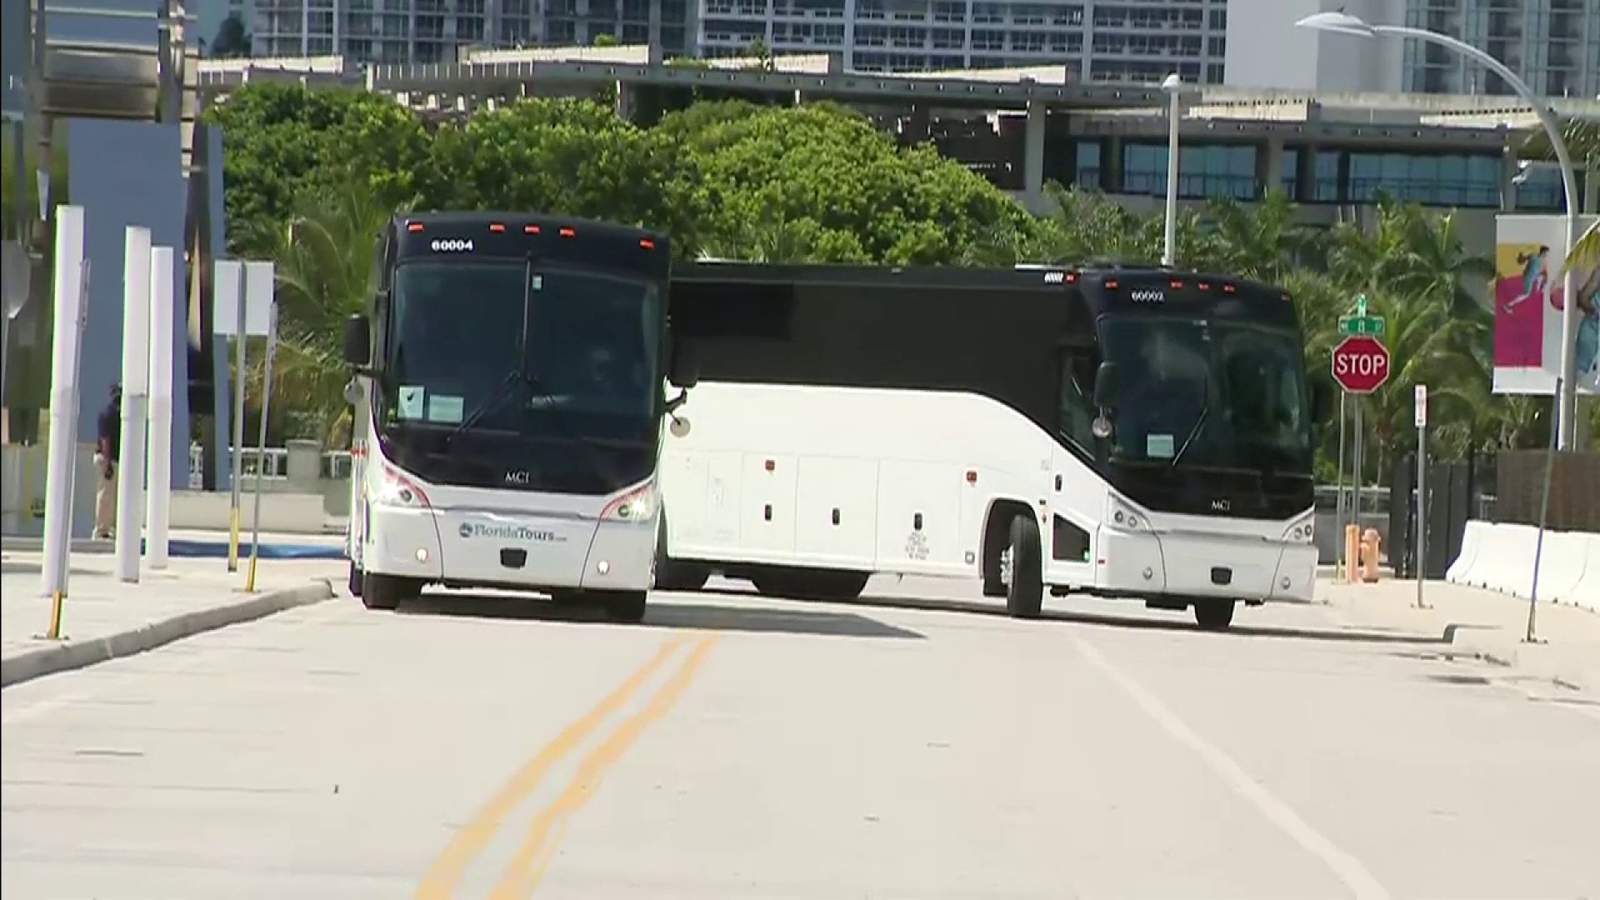 Miami Heat board pair of buses bound for NBAs bubble in Orlando